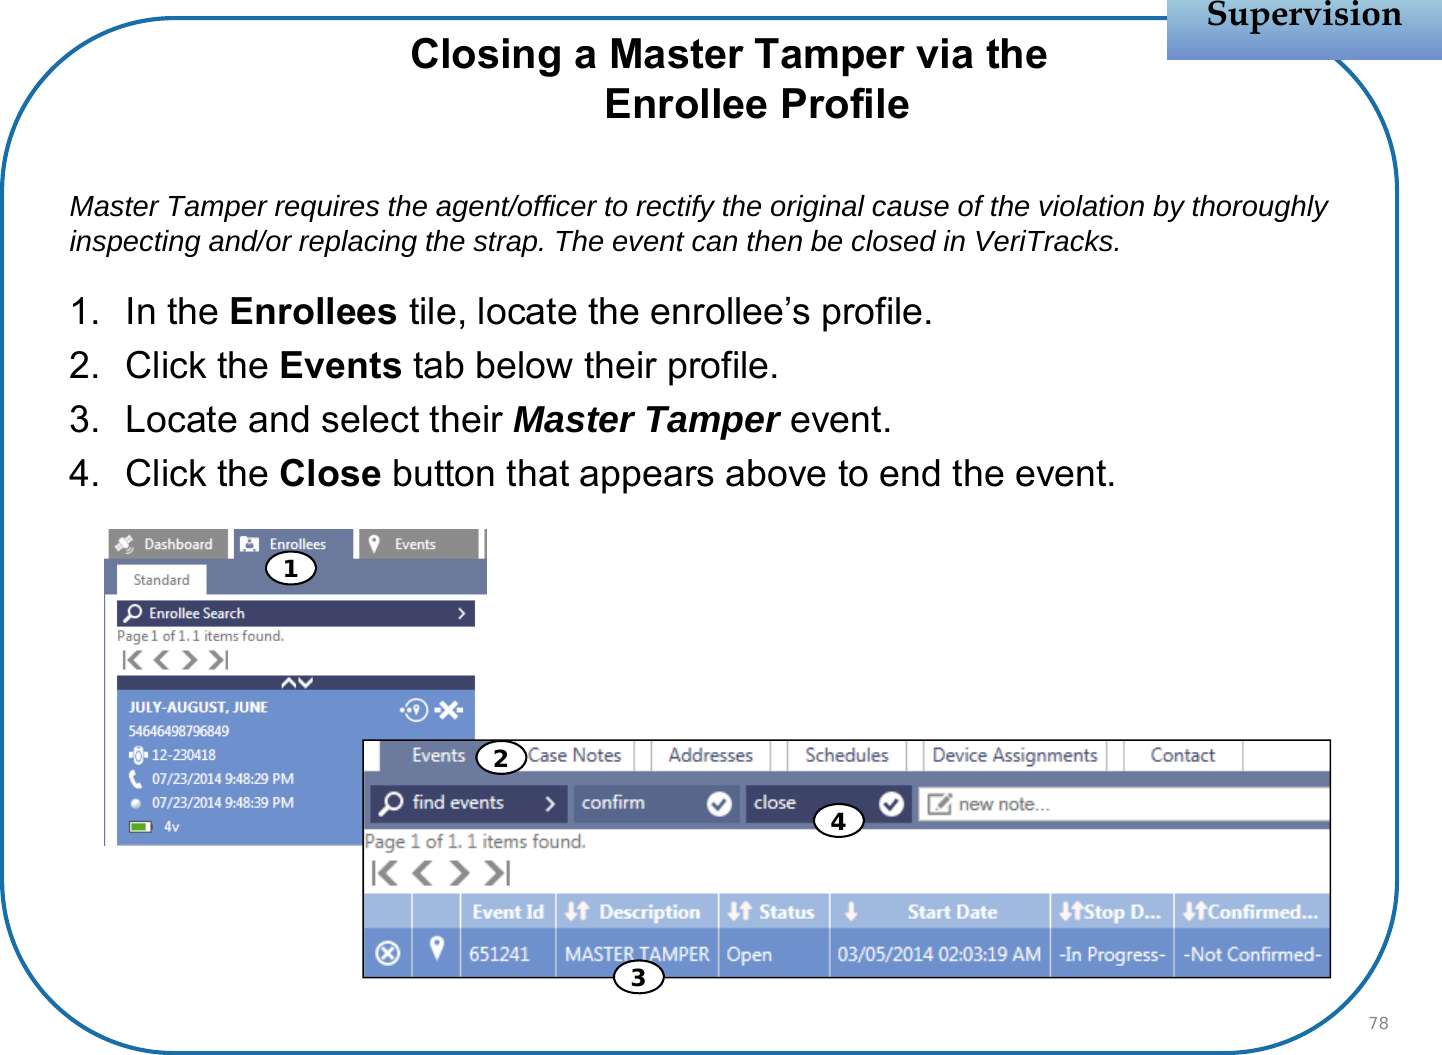 Closing a Master Tamper via theEnrollee ProfileMaster Tamper requires the agent/officer to rectify the original cause of the violation by thoroughly inspecting and/or replacing the strap. The event can then be closed in VeriTracks. 1. In the Enrollees tile, locate the enrollee’s profile.2. Click the Events tab below their profile.3. Locate and select their Master Tamper event. 4. Click the Close button that appears above to end the event.SupervisionSupervision781324